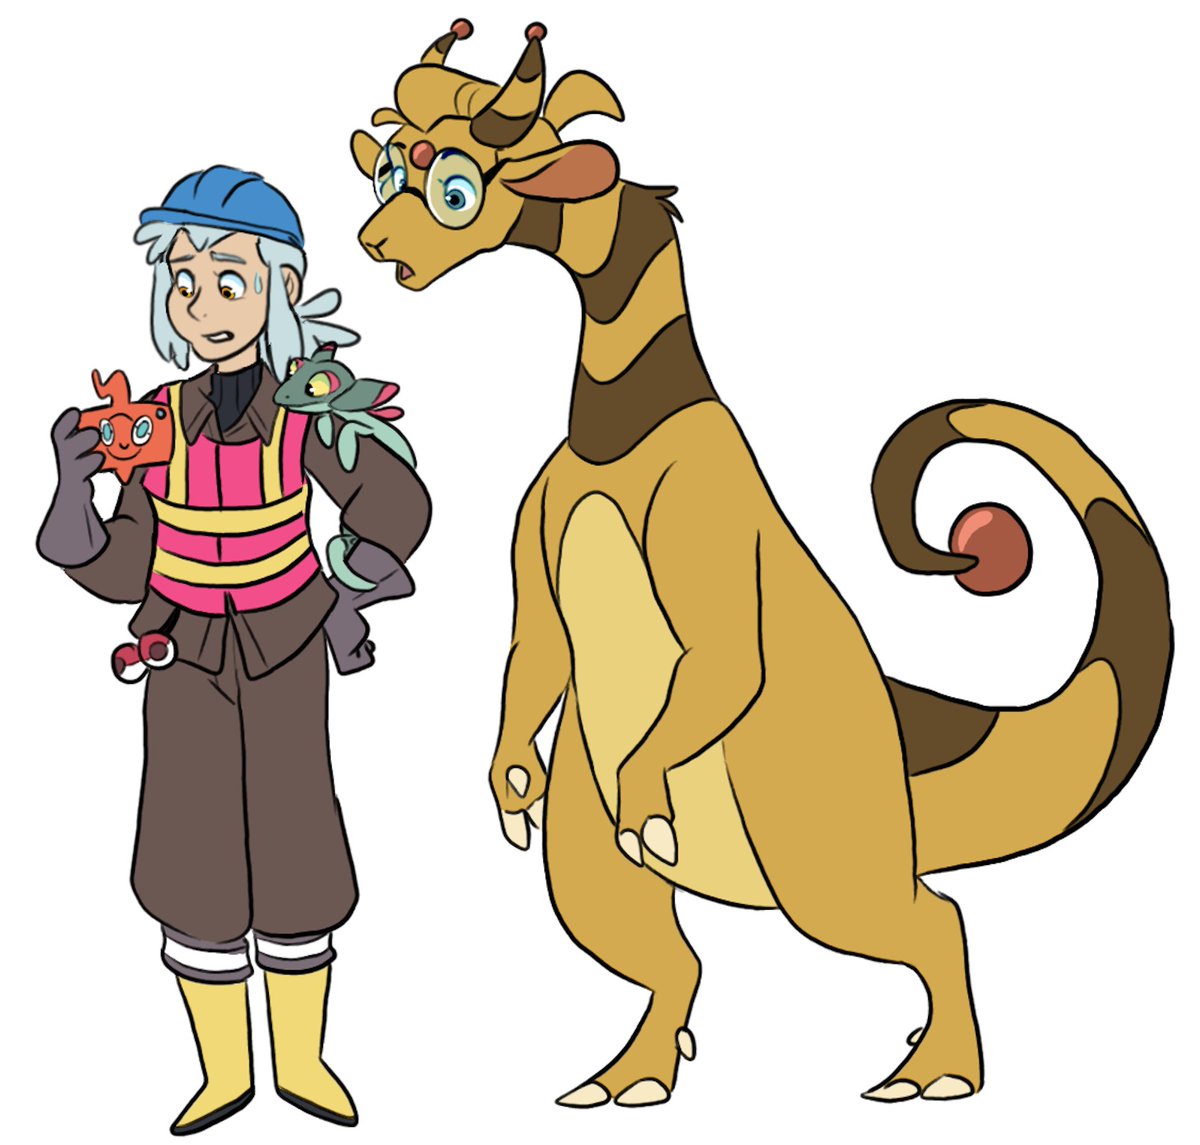 Jemima and her lil Dreepy friend discovering a weird Ampharos crying in a cave/mine she's working in. :) The Ampharos can speak some choppy human speech through her sniffles and whatnot. And Jemima's Pokedex is having trouble identifying the Pokemon in its database.